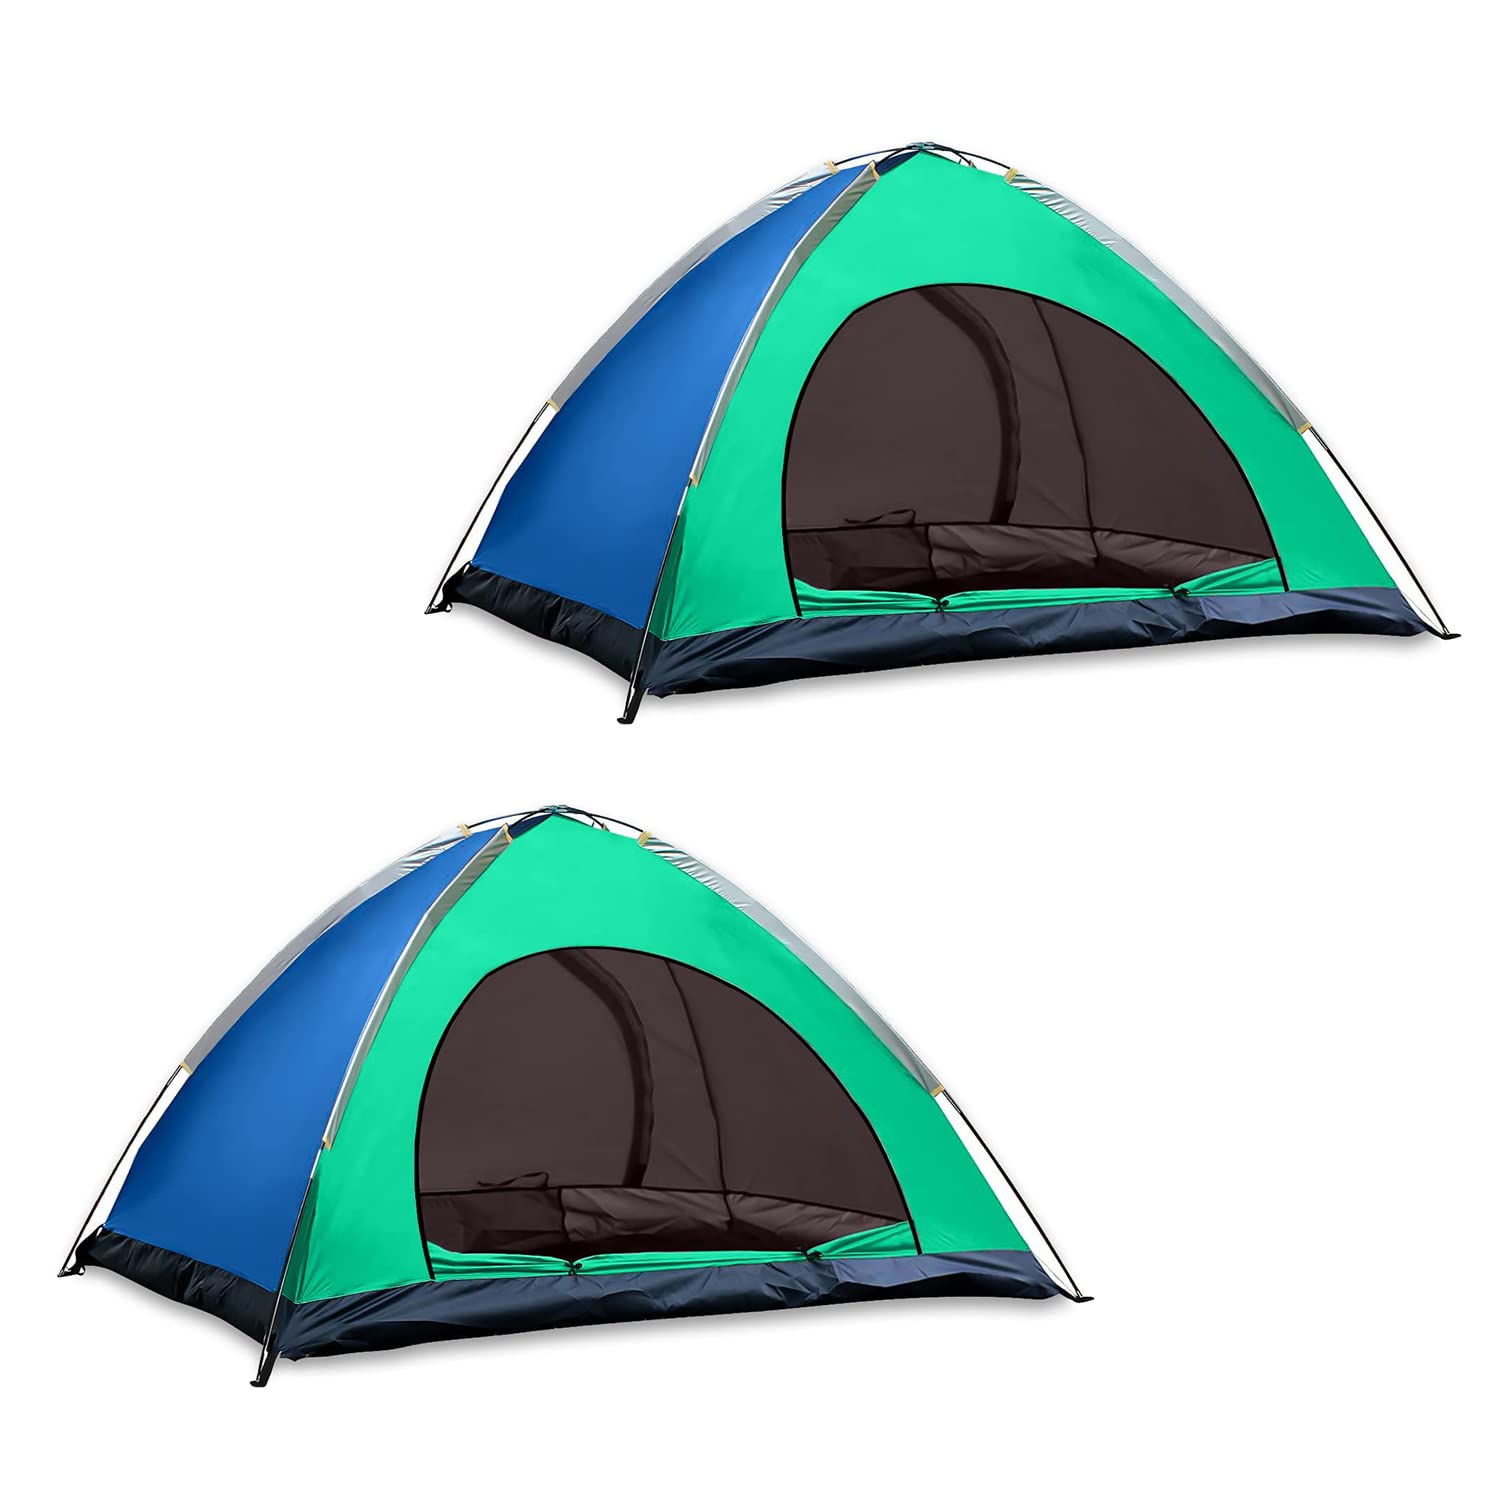 2 Person Waterproof Portable Camping Tent|for Outdoors,Picnic,Hiking (Pack of 2)